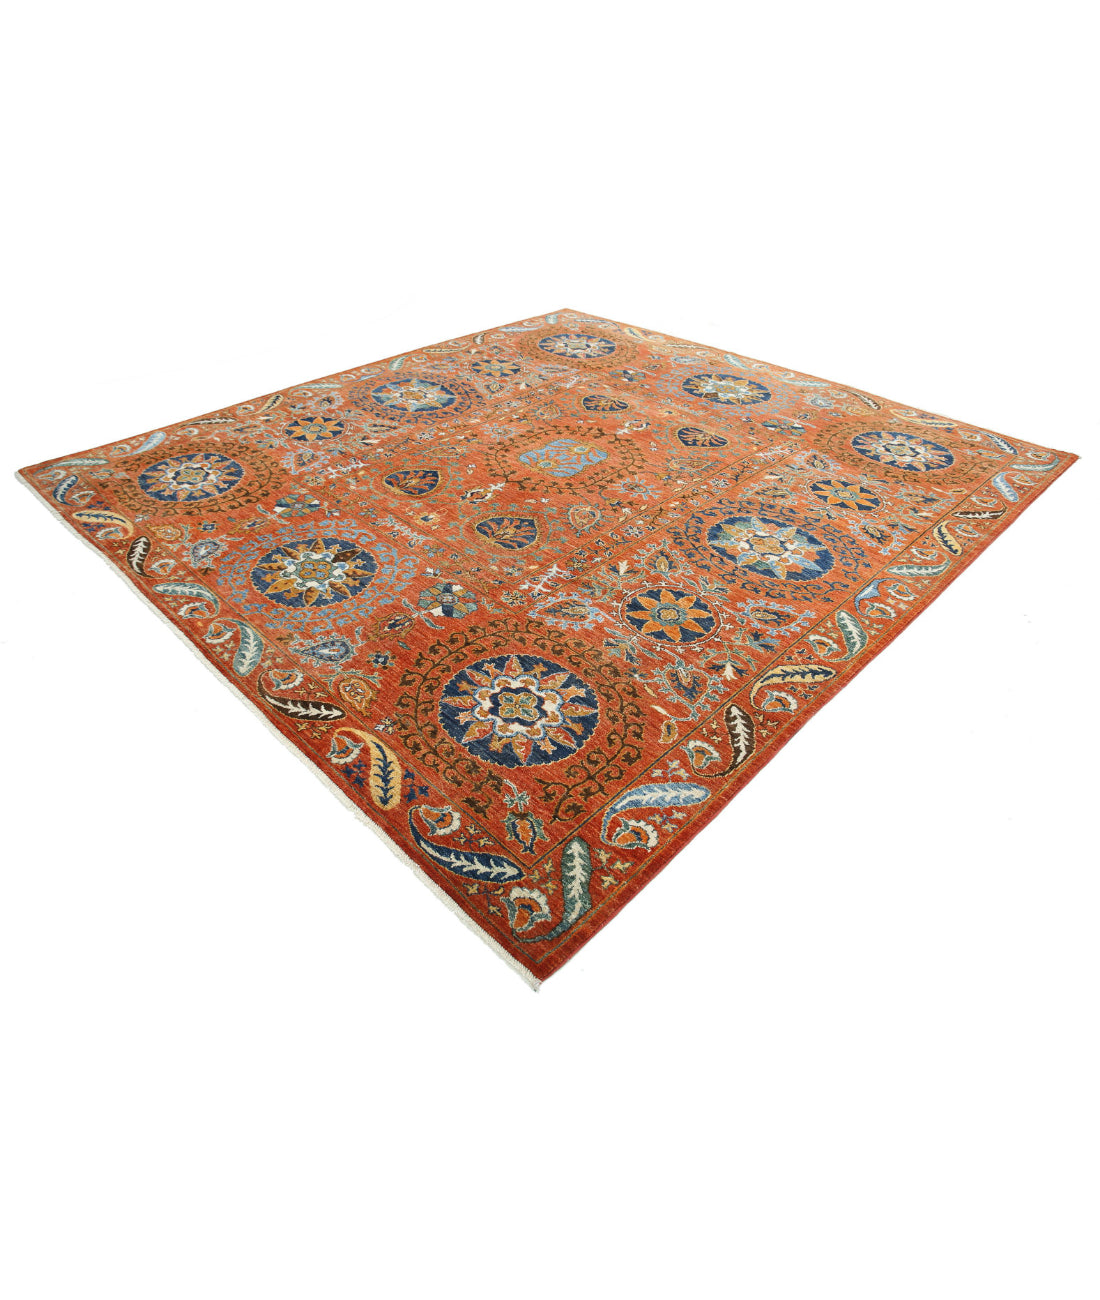 Hand Knotted Nomadic Caucasian Humna Wool Rug - 9'8'' x 10'4'' 9'8'' x 10'4'' (290 X 310) / Rust / Blue